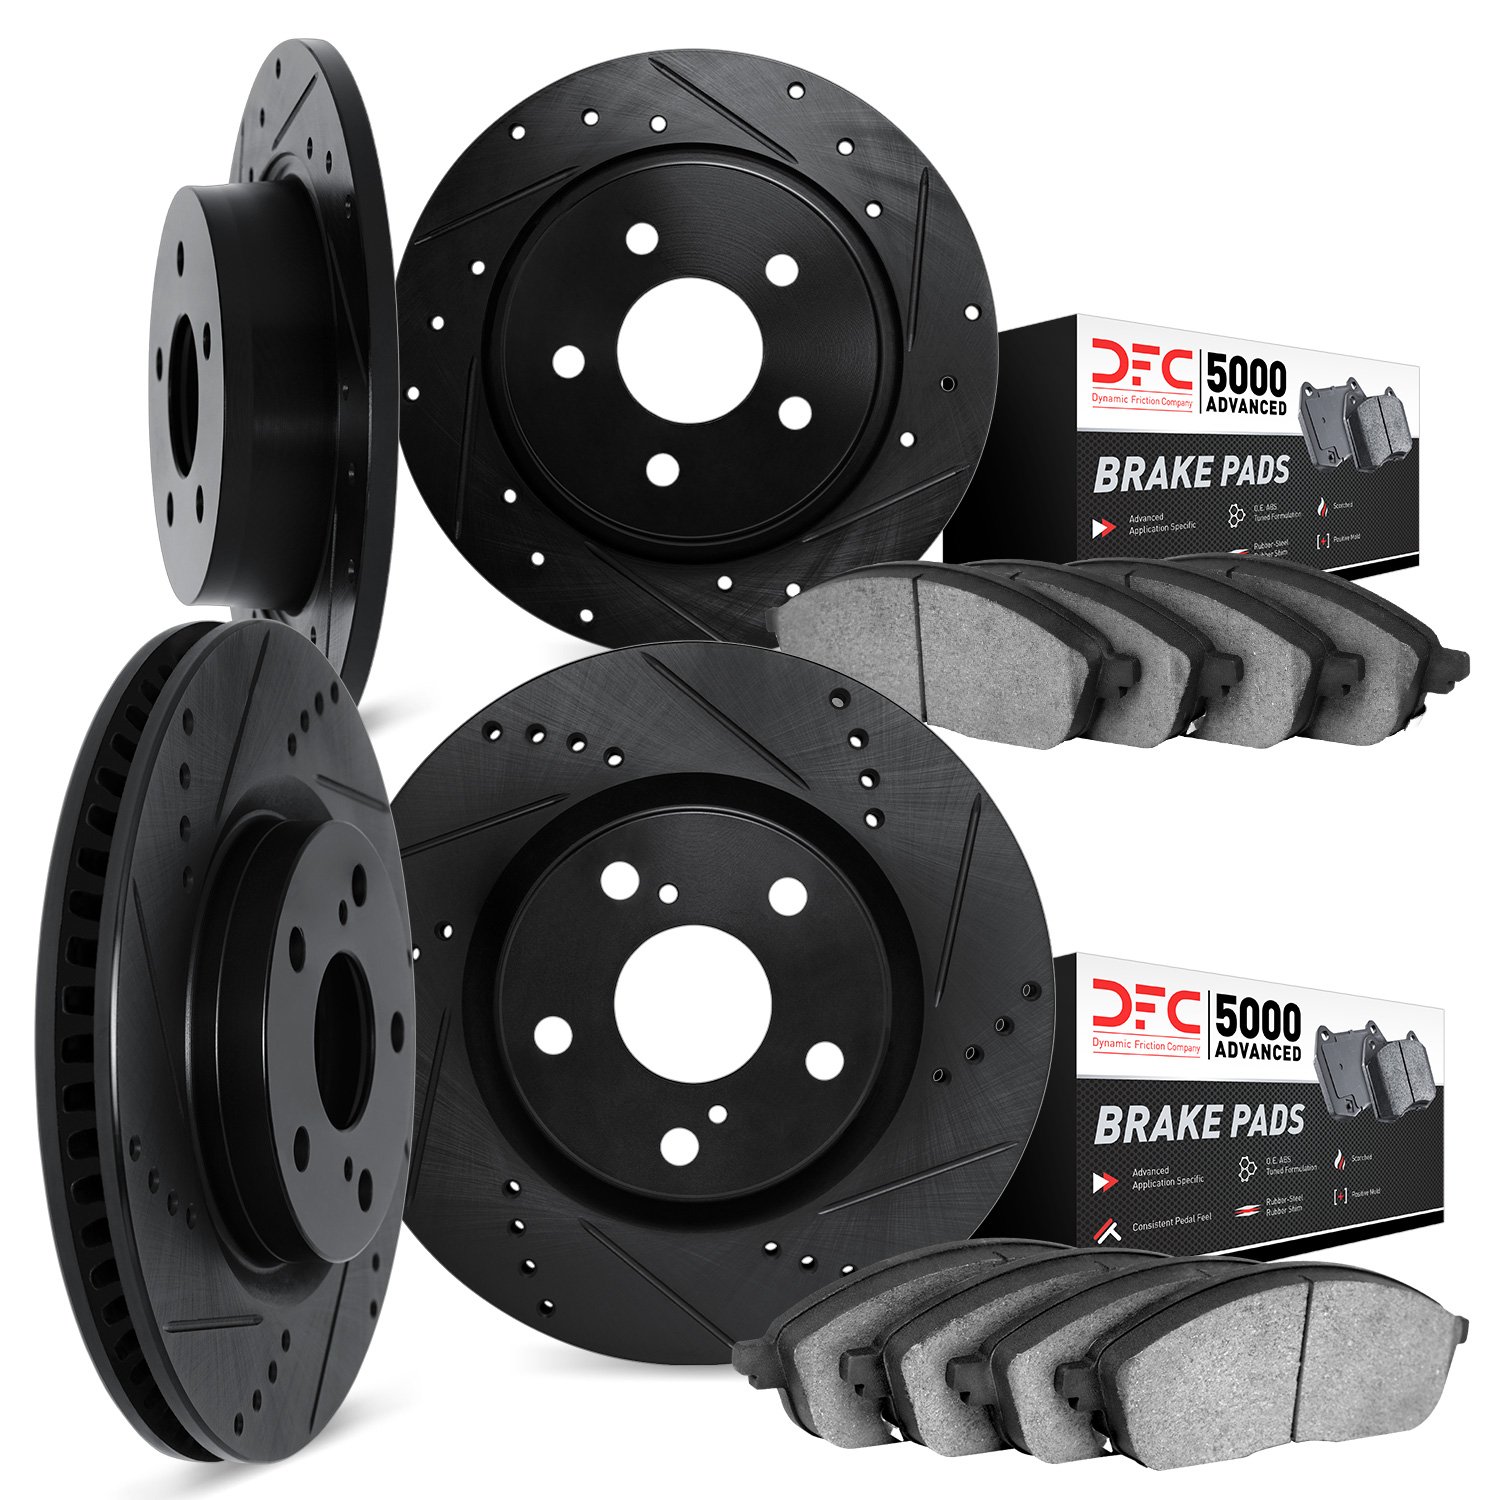 8504-59086 Drilled/Slotted Brake Rotors w/5000 Advanced Brake Pads Kit [Black], 2017-2019 Acura/Honda, Position: Front and Rear